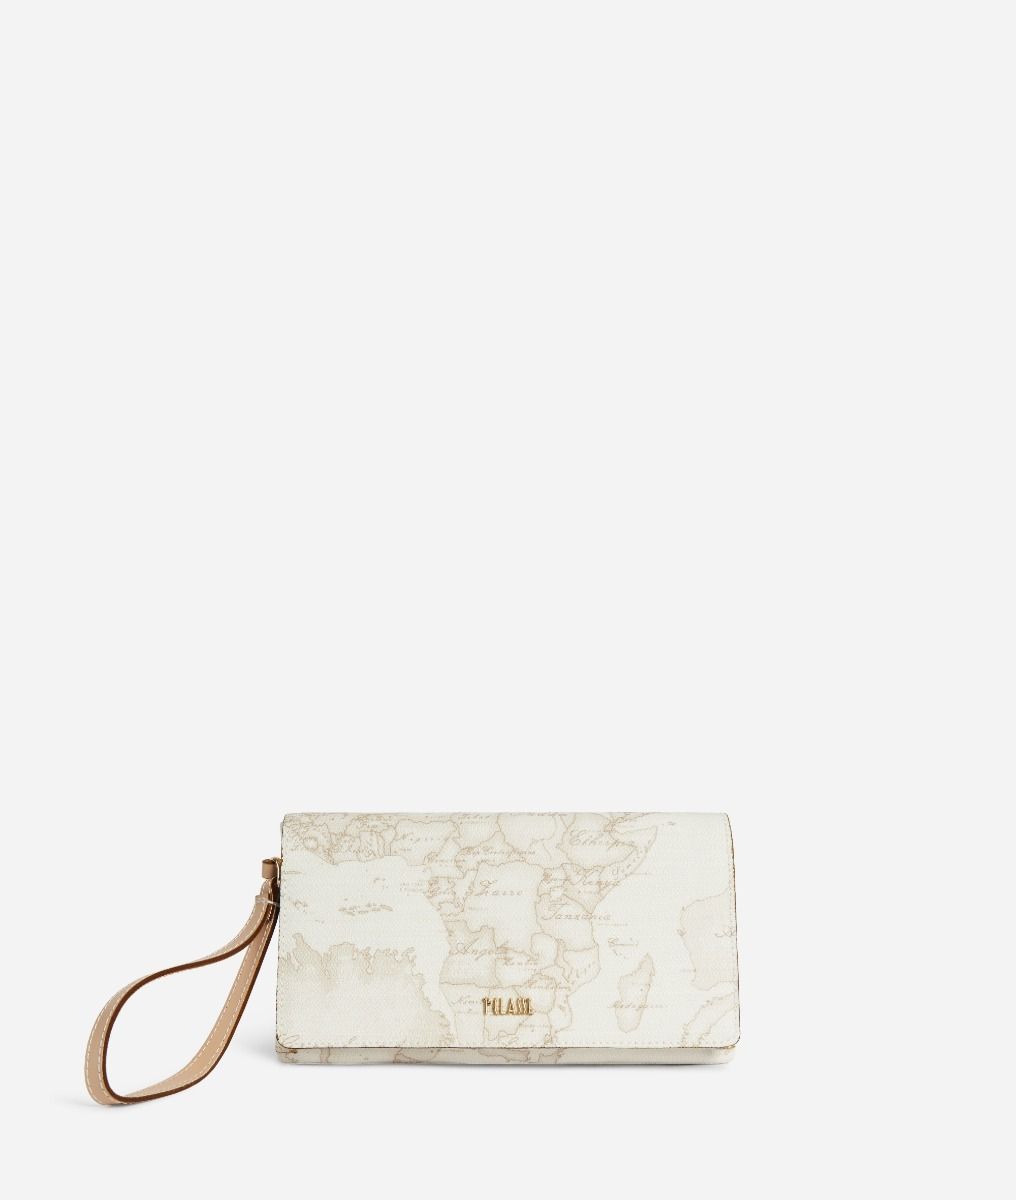 Geo White clutch bag with flap,front